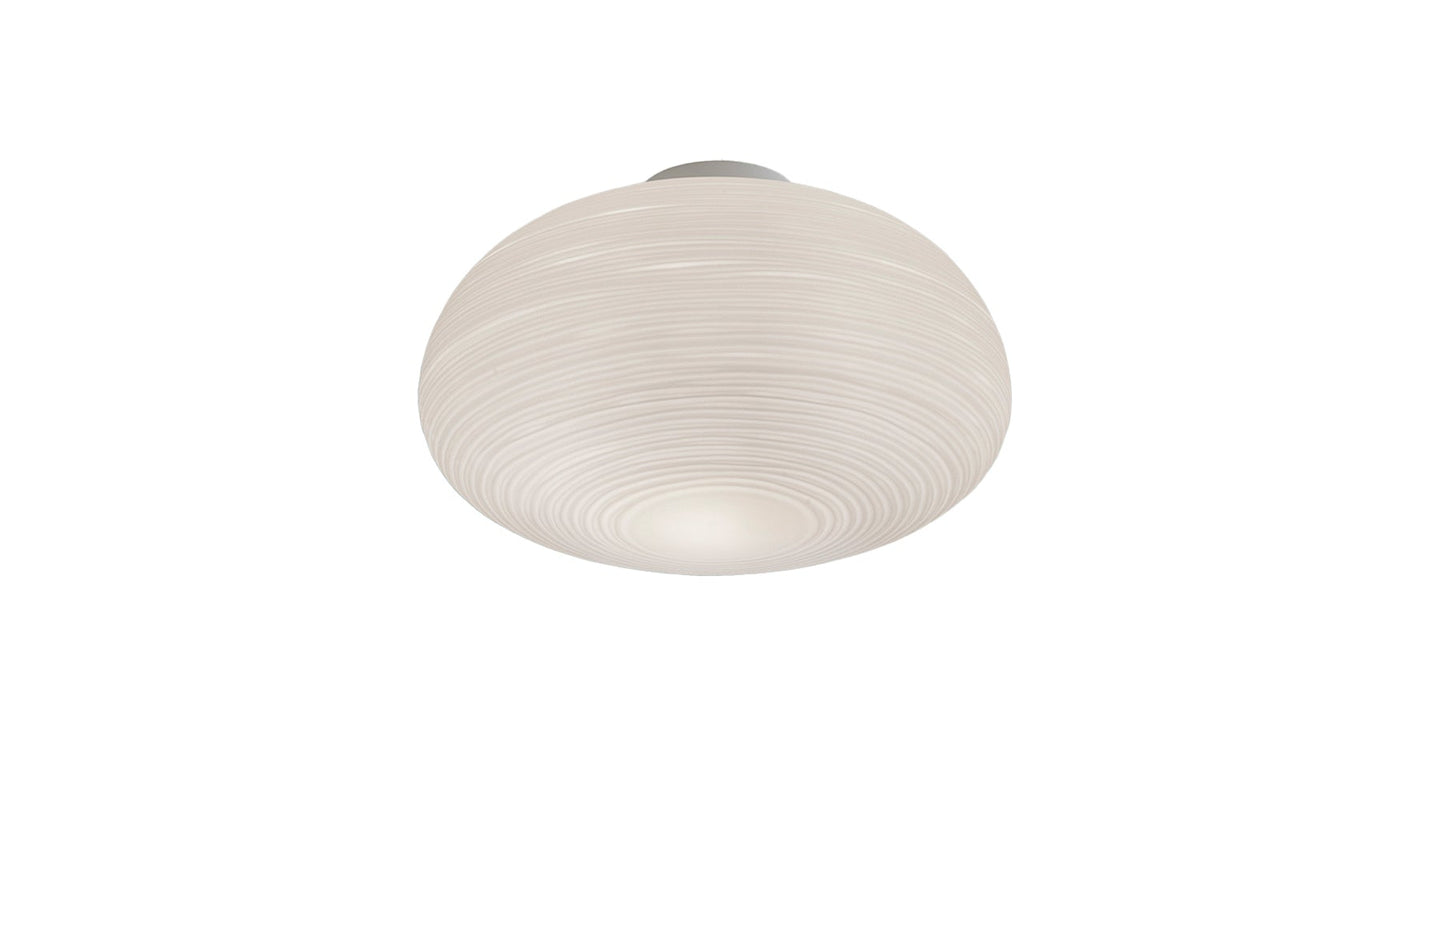 Rituals 2 Ceiling/Wall Lamp
